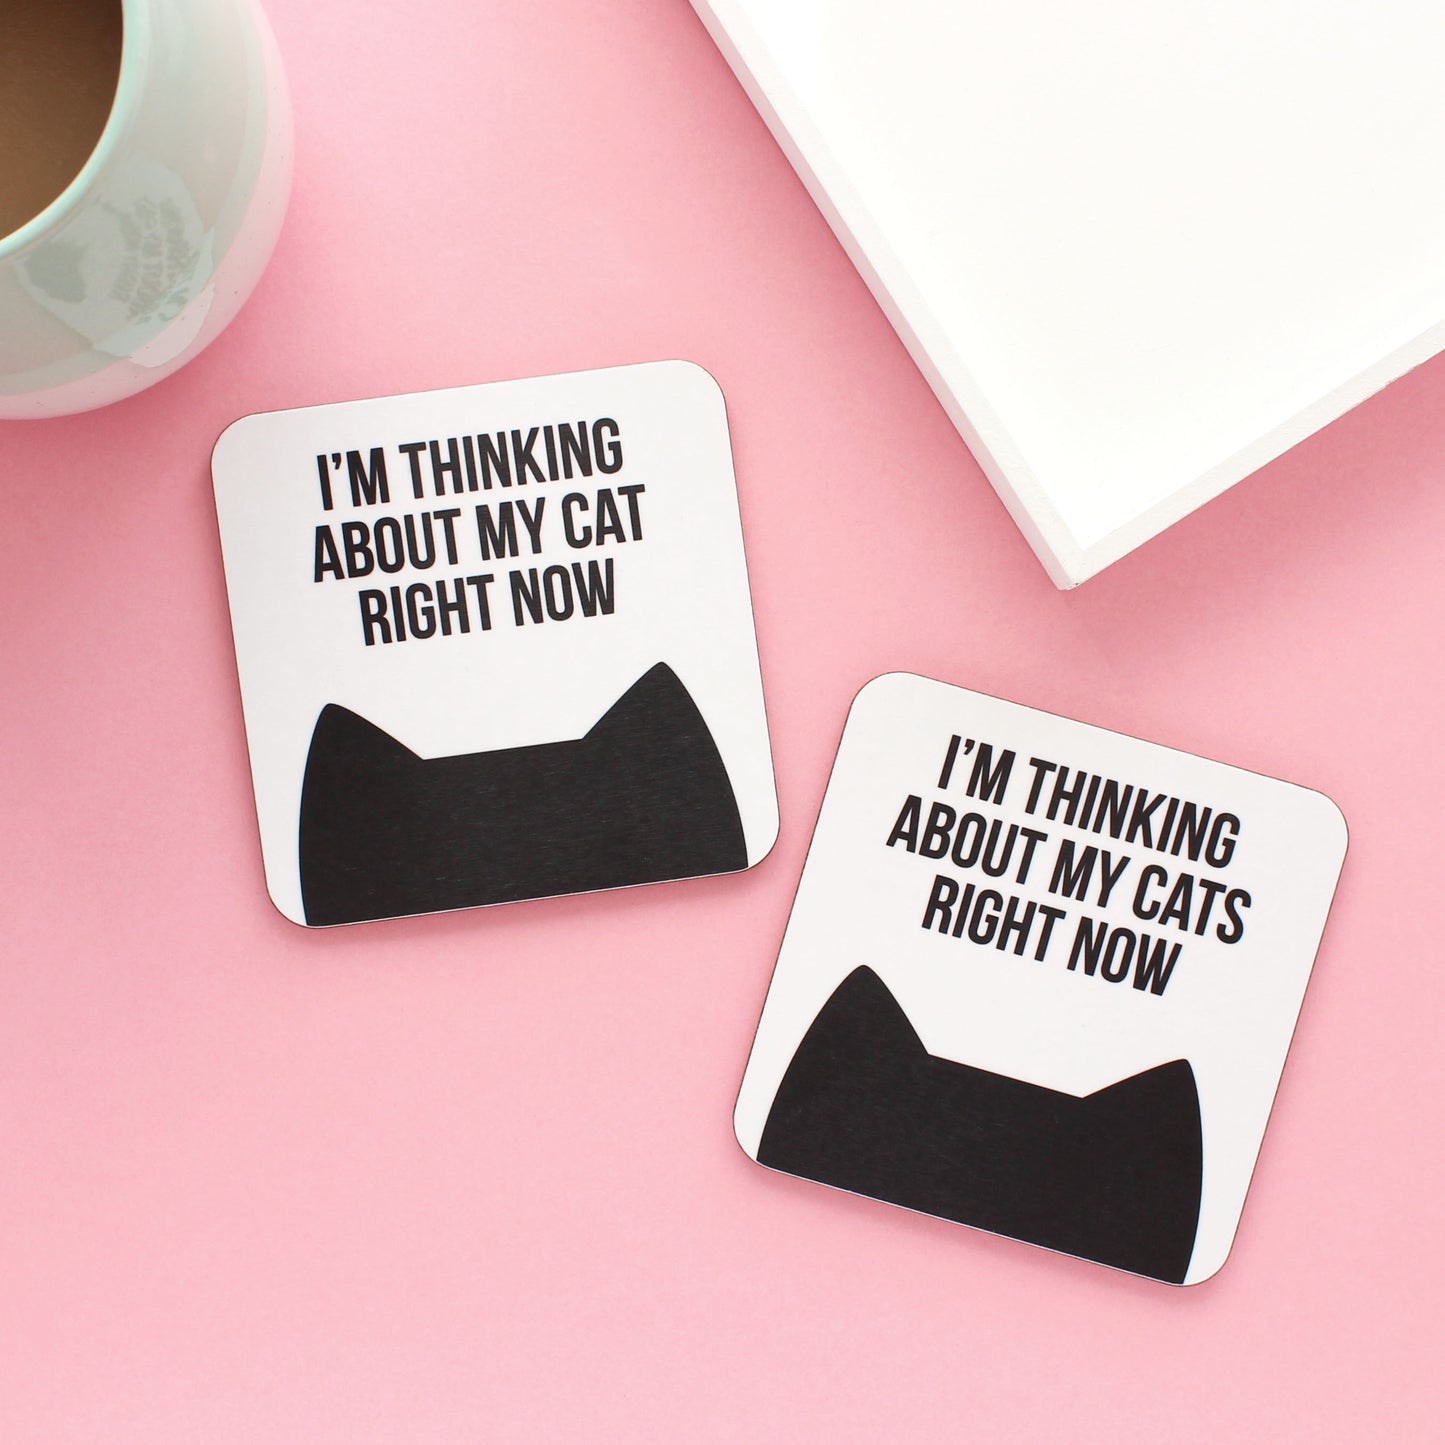 I'm thinking about my cat(s) right now coaster